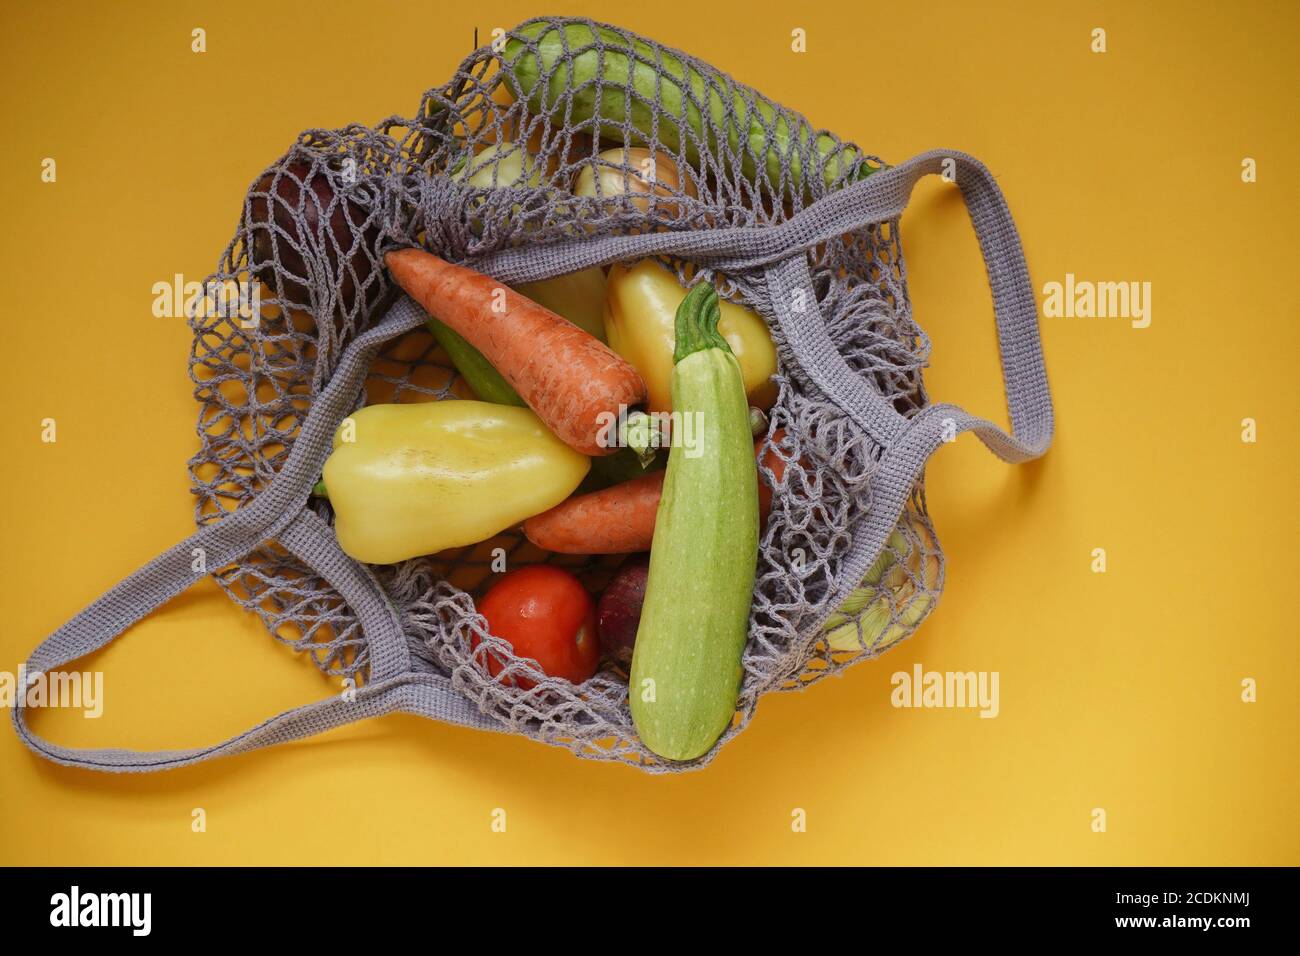 Gray bag string bag with vegetables,zucchini,bell peppers,carrots,beets,onions yellow background.Harvest from garden fresh bright vegetables.Concept z Stock Photo